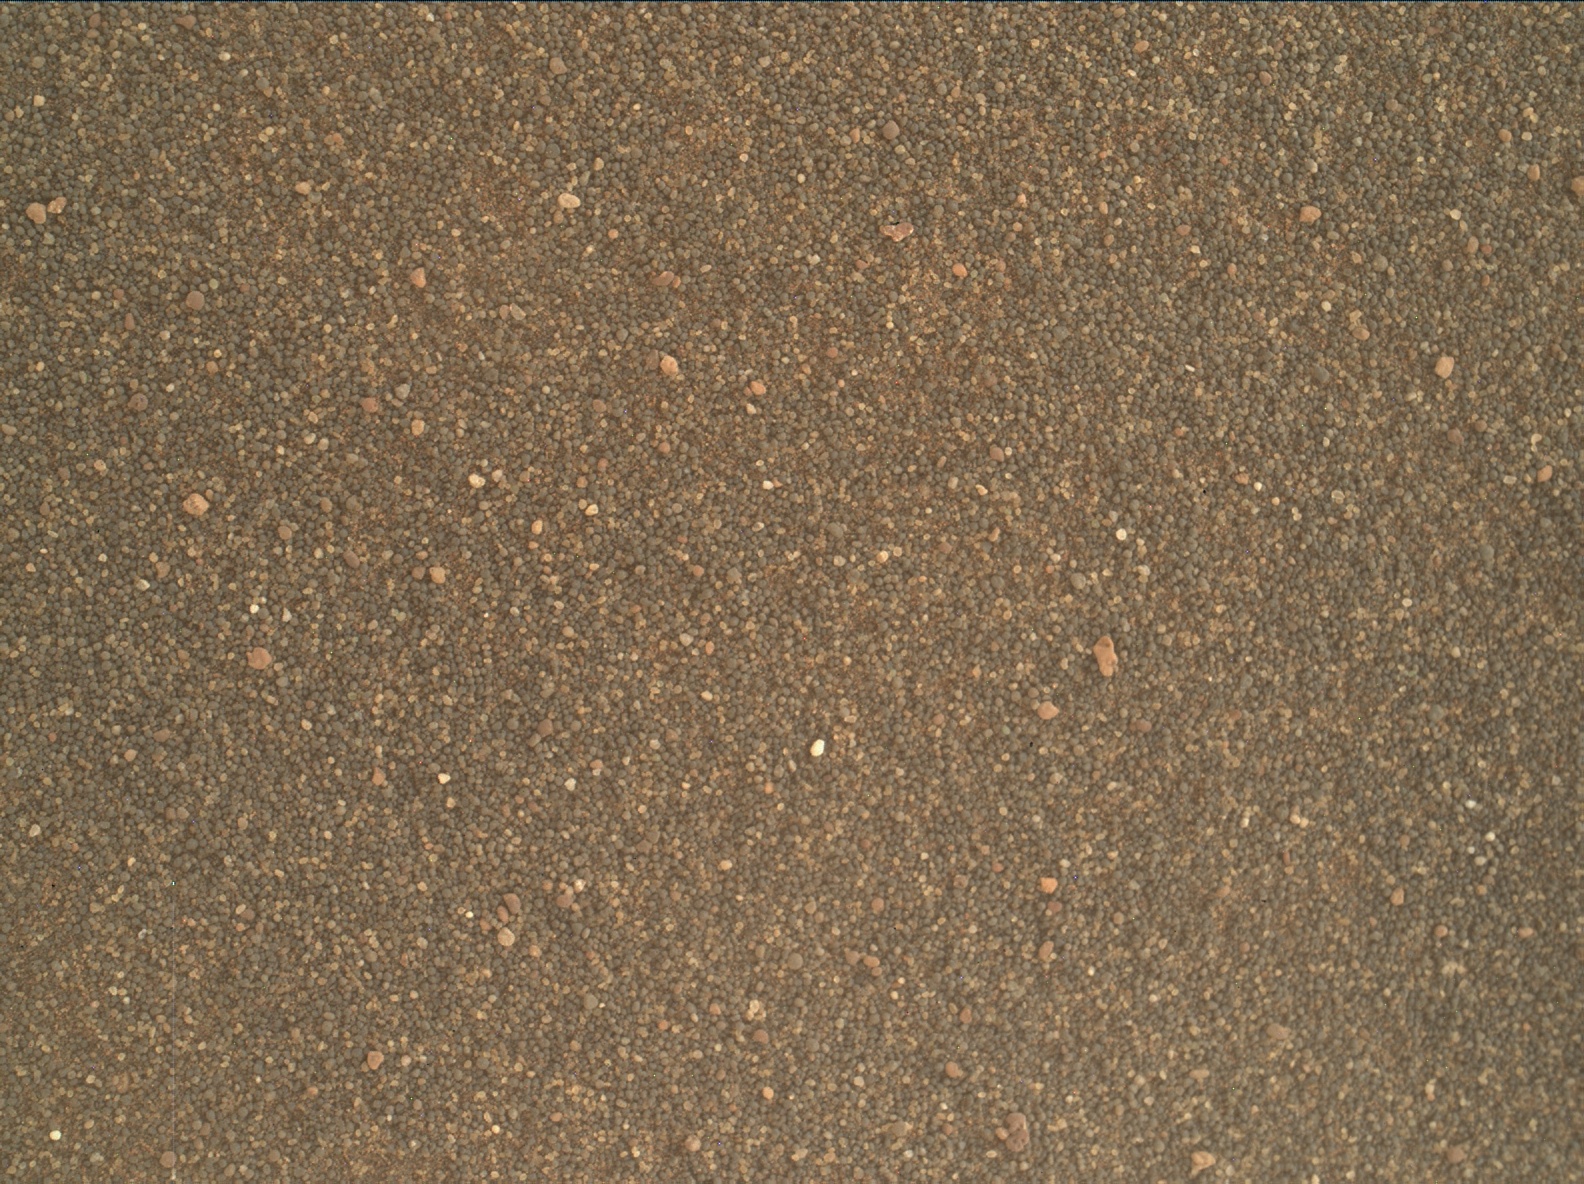 Nasa's Mars rover Curiosity acquired this image using its Mars Hand Lens Imager (MAHLI) on Sol 3285